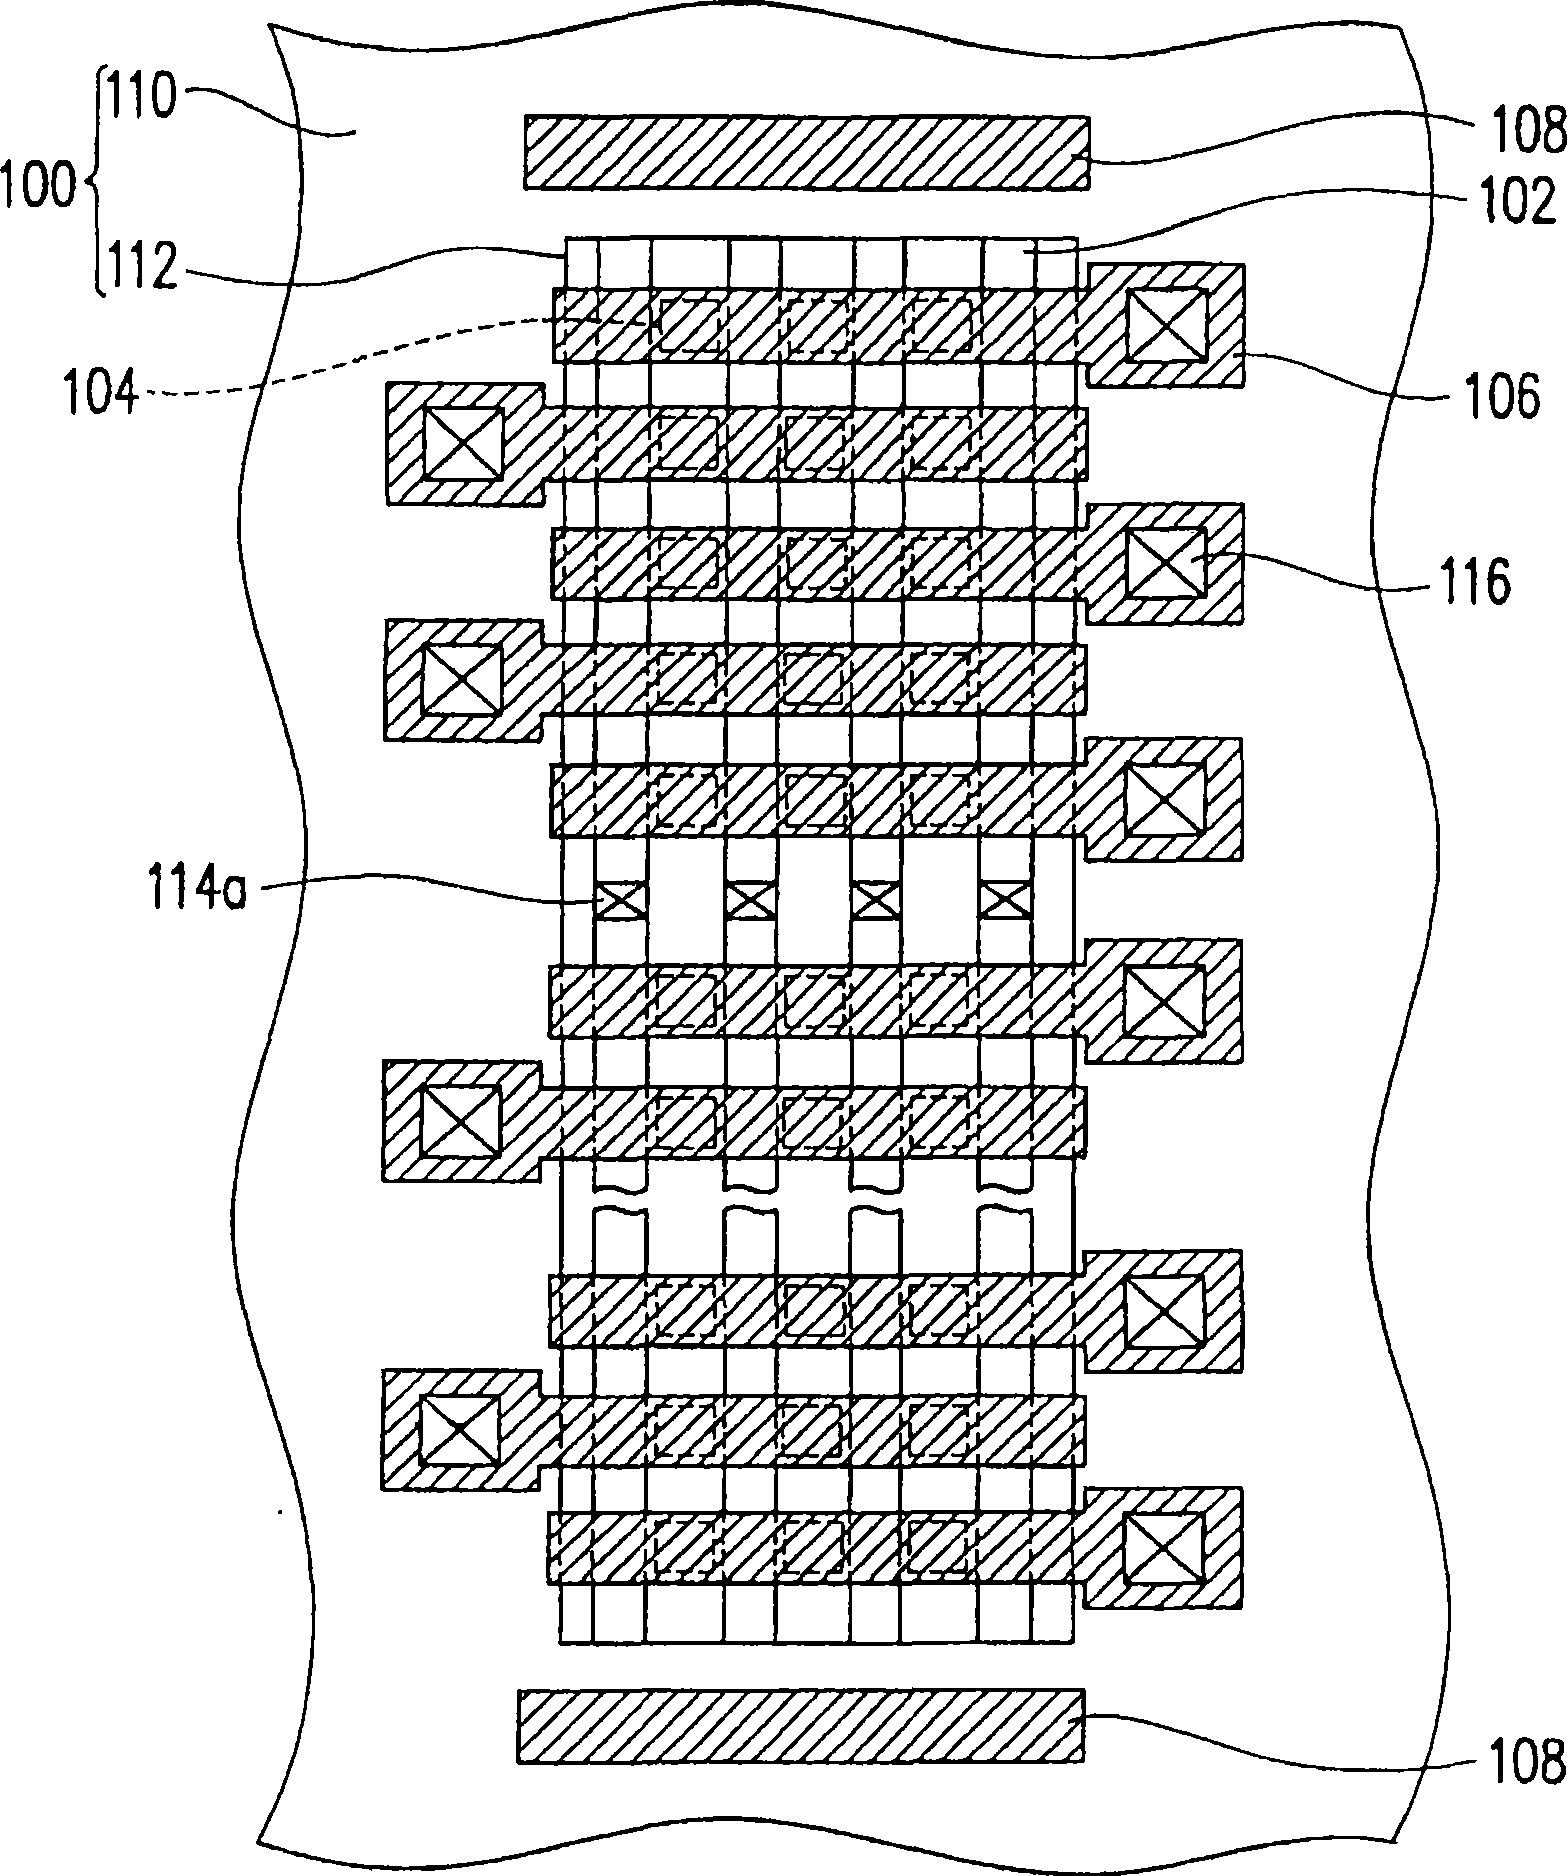 Layout structure of non-volatile memory